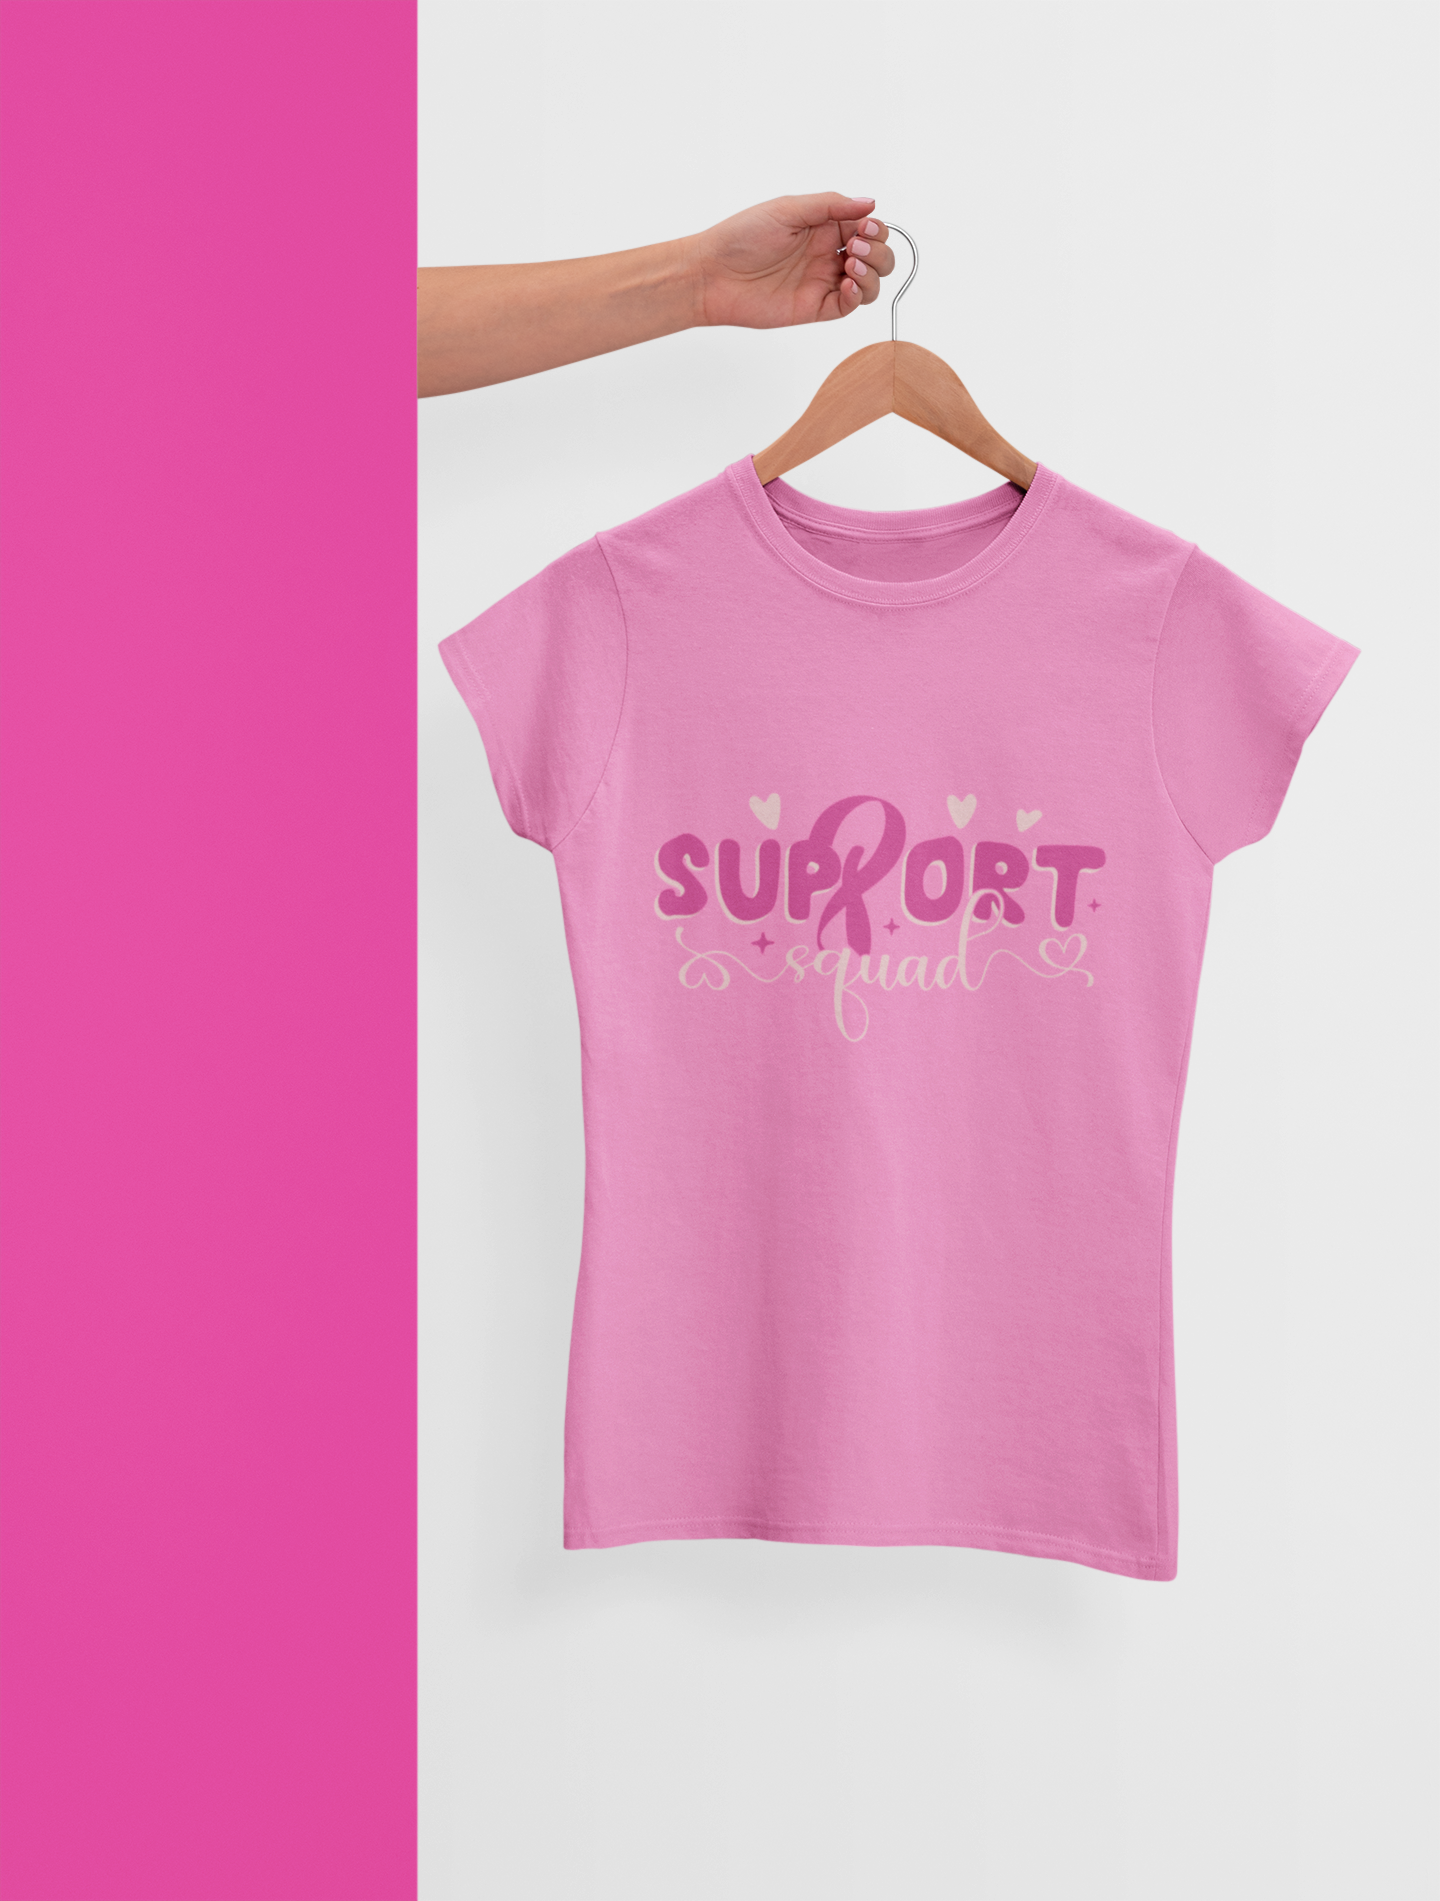 Breast Cancer Awareness - Support Squad